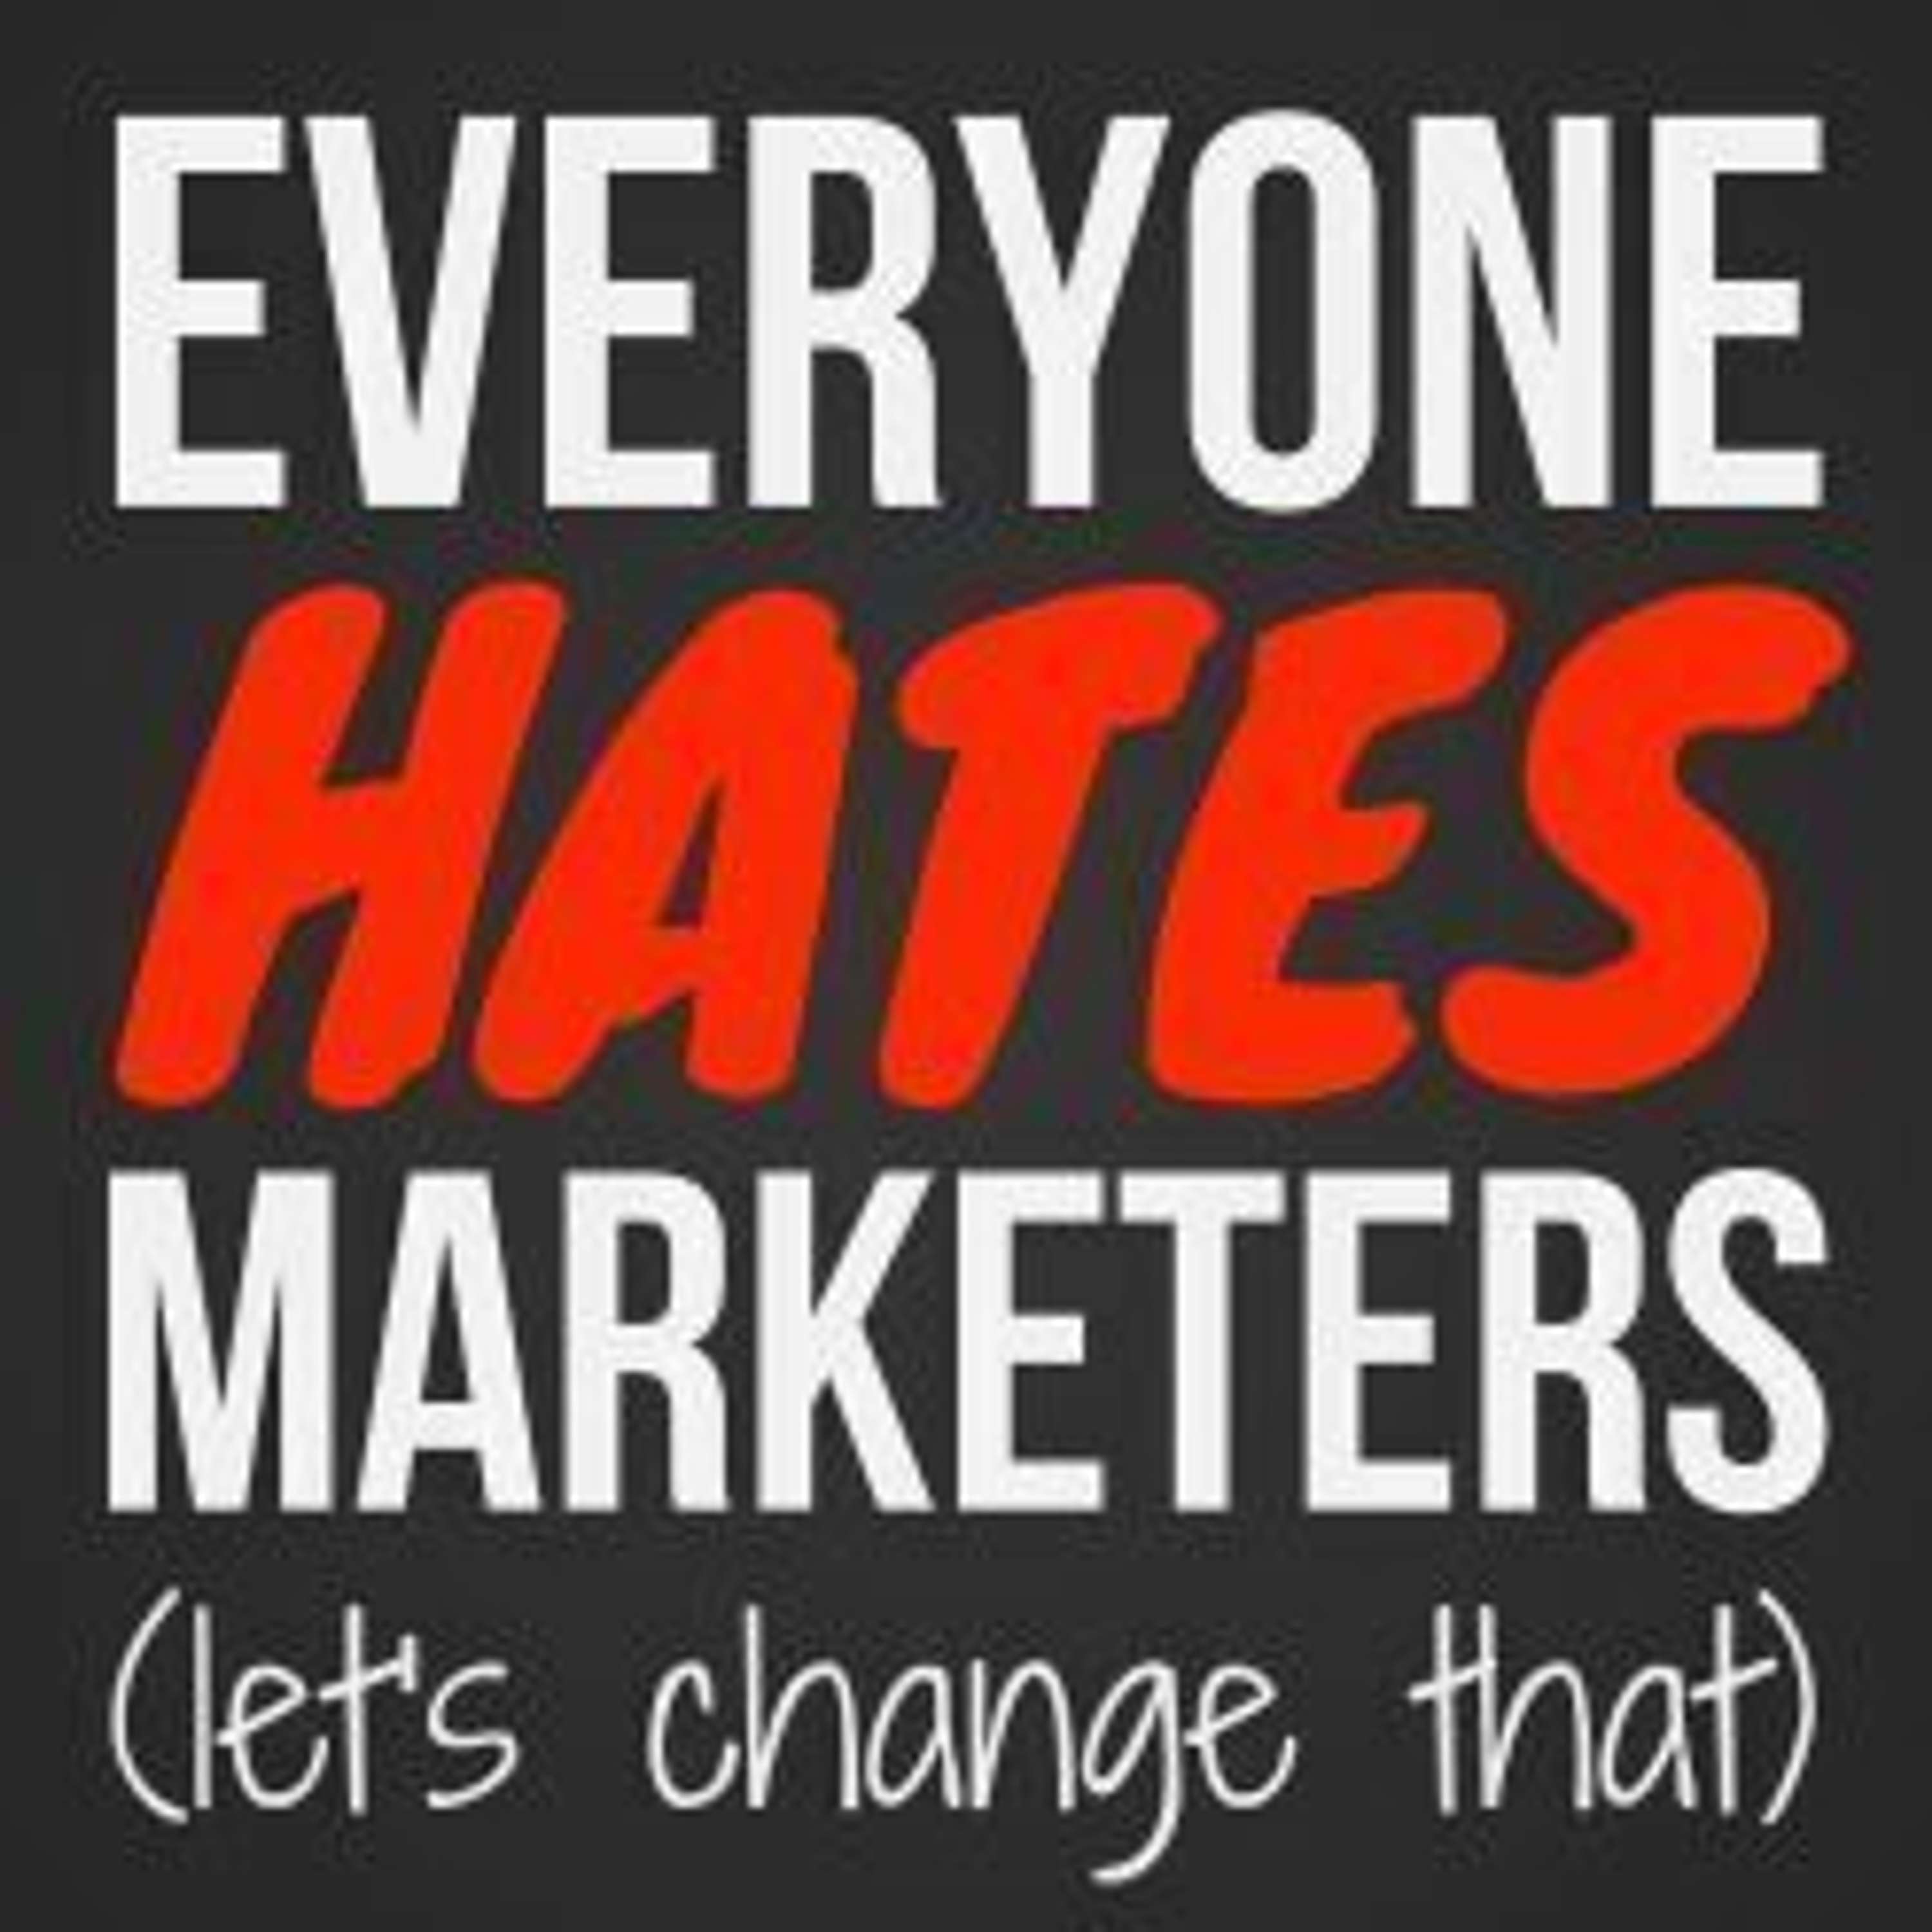 Laura Roeder: Here's Why Digital Marketers Should Never Lie